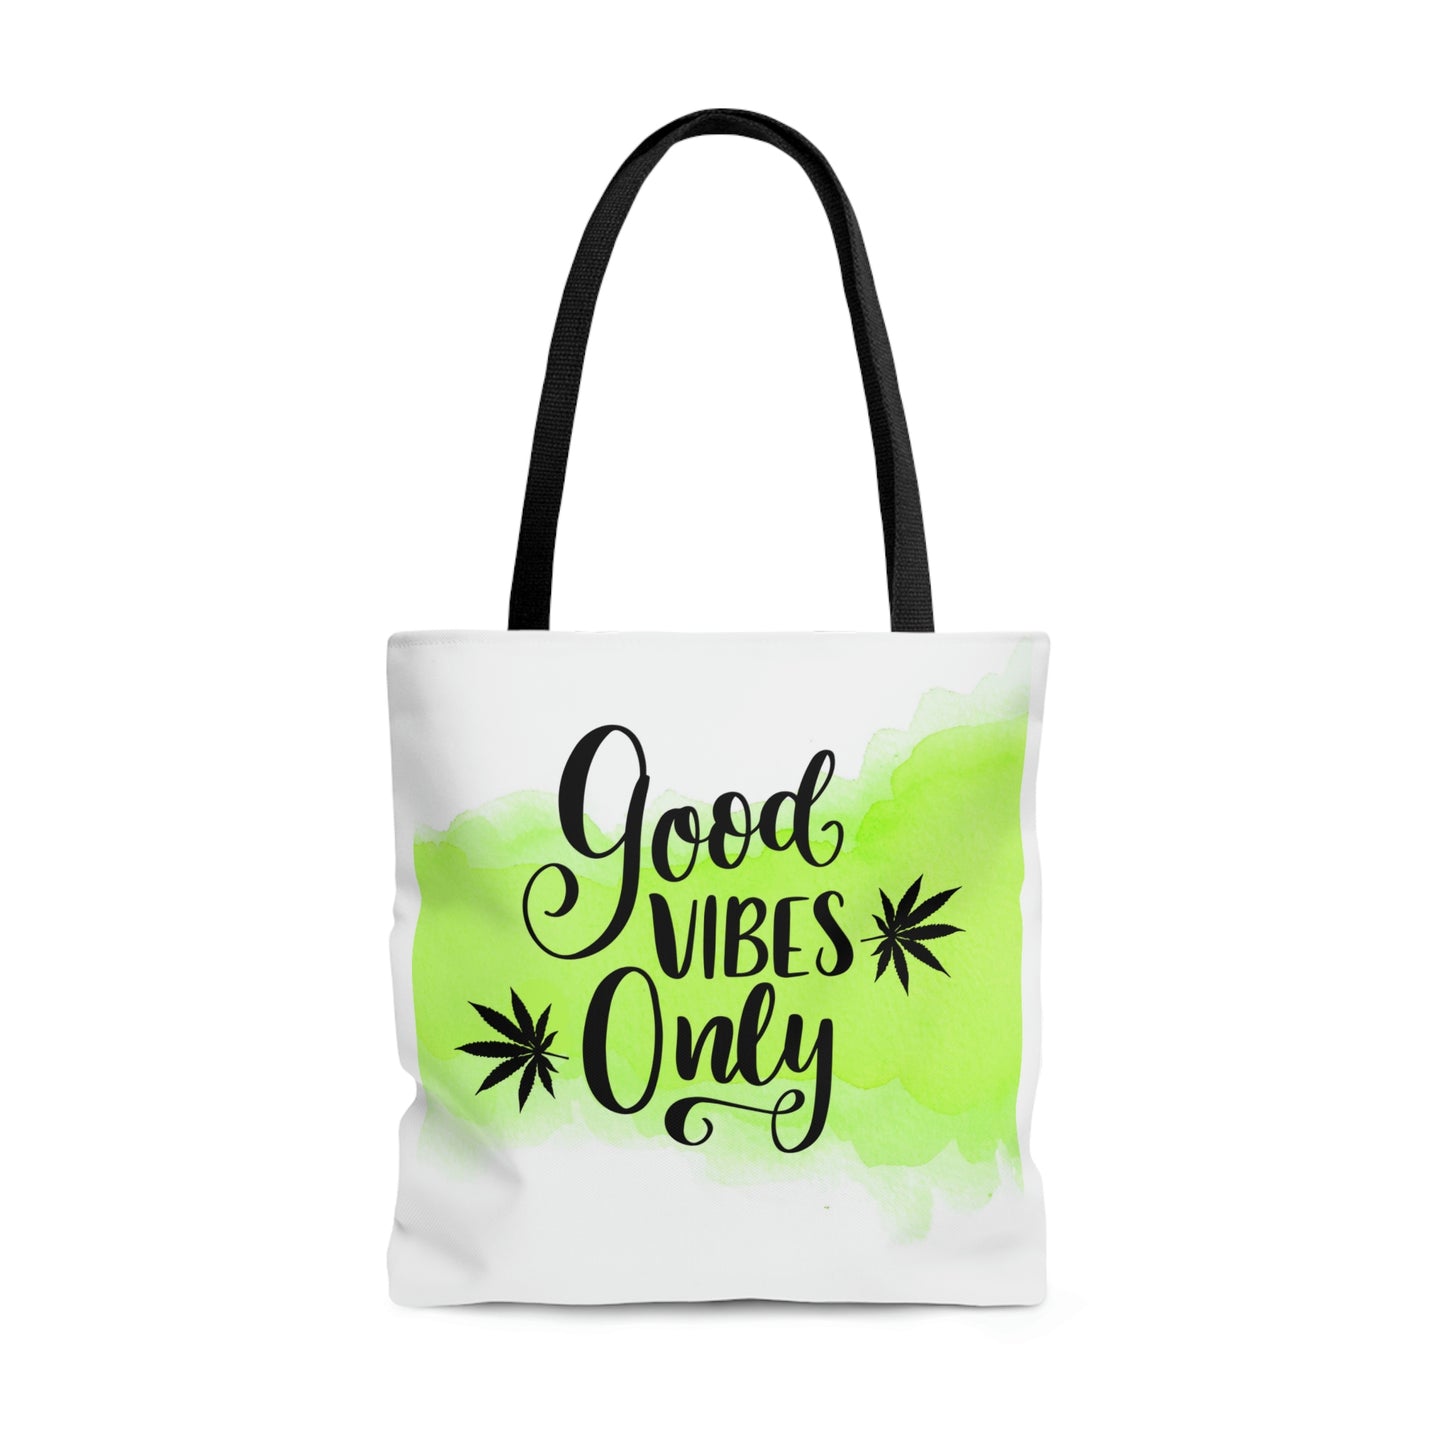 The black and white Good Vibes Only Weed Tote Bag designed perfectly for your day to day outings